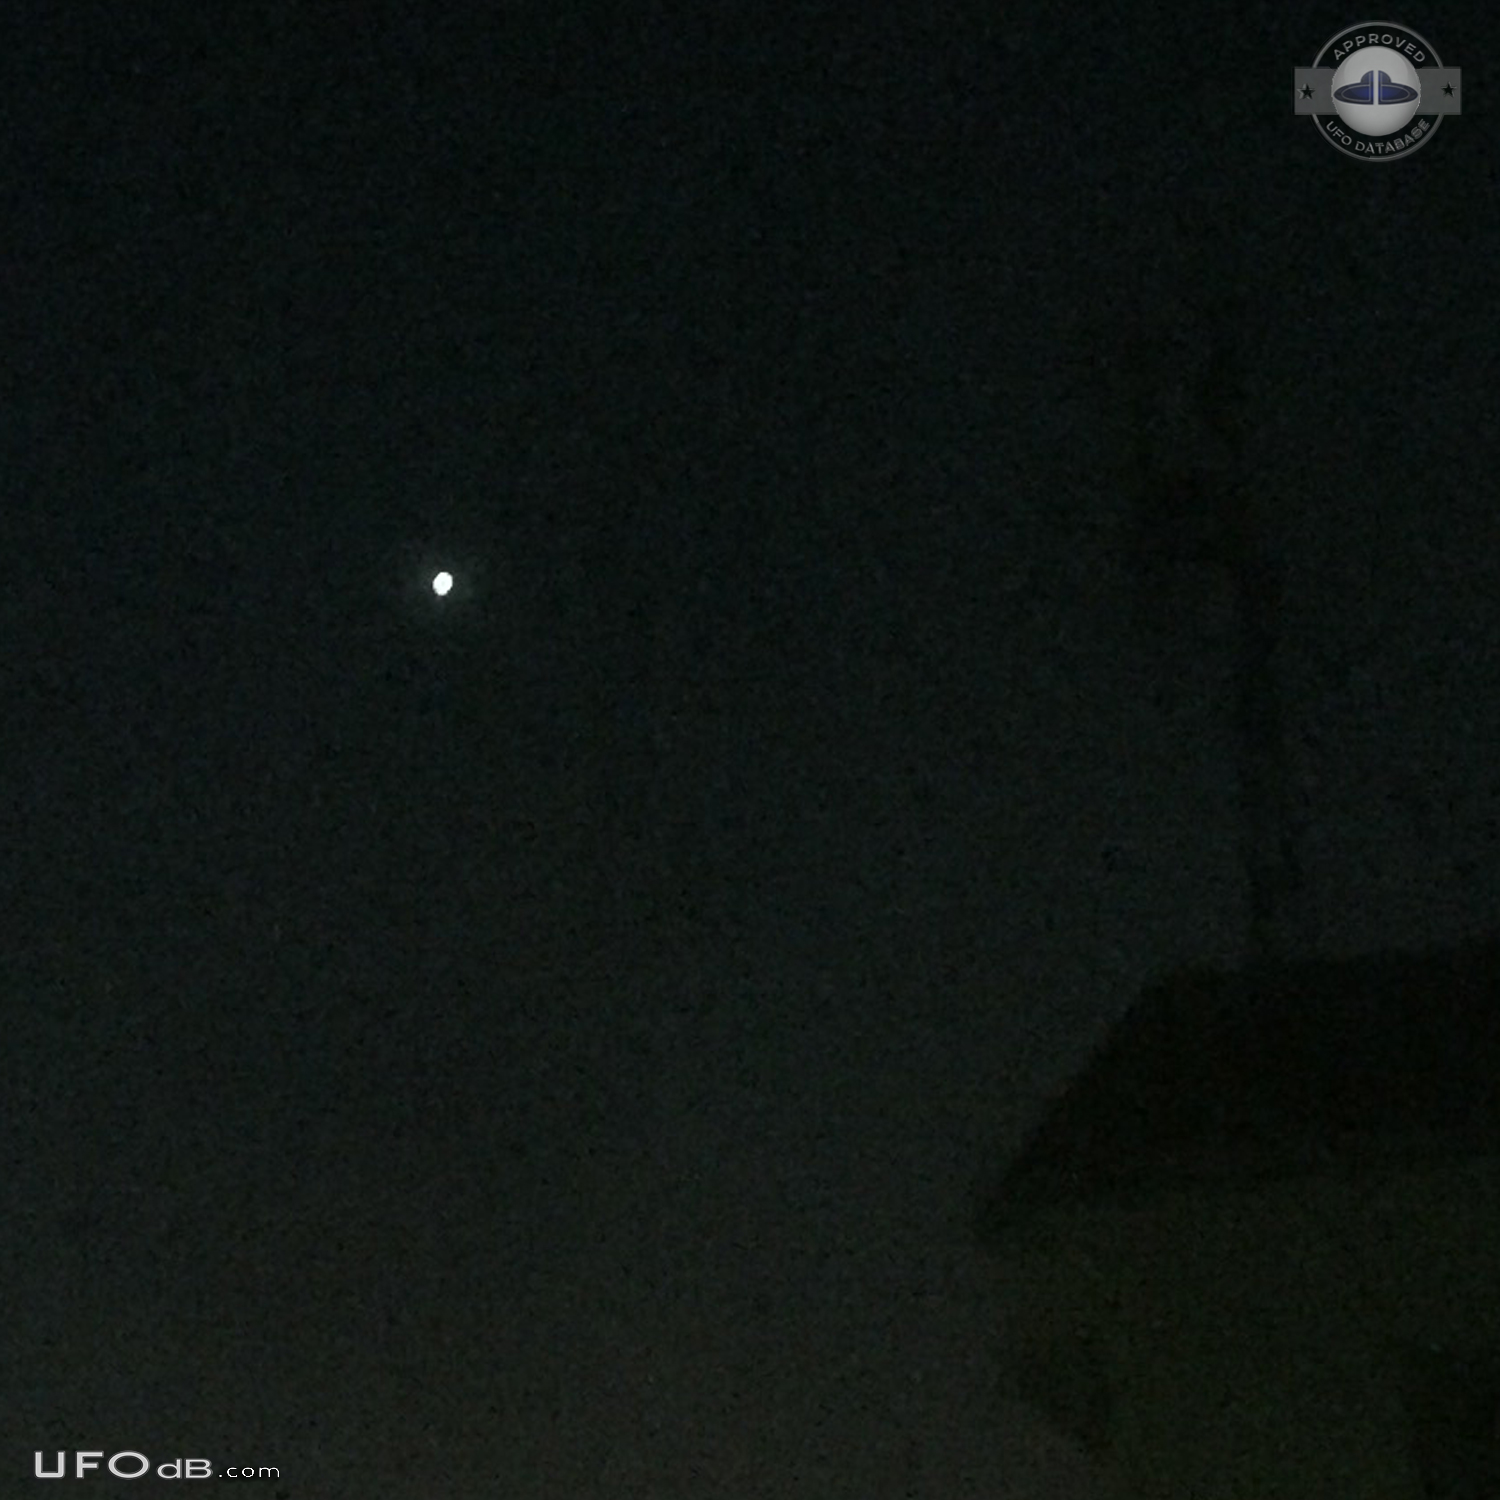 Very bright UFO seemed to have tentacles - Bangkok Thailand 2017 UFO Picture #805-4